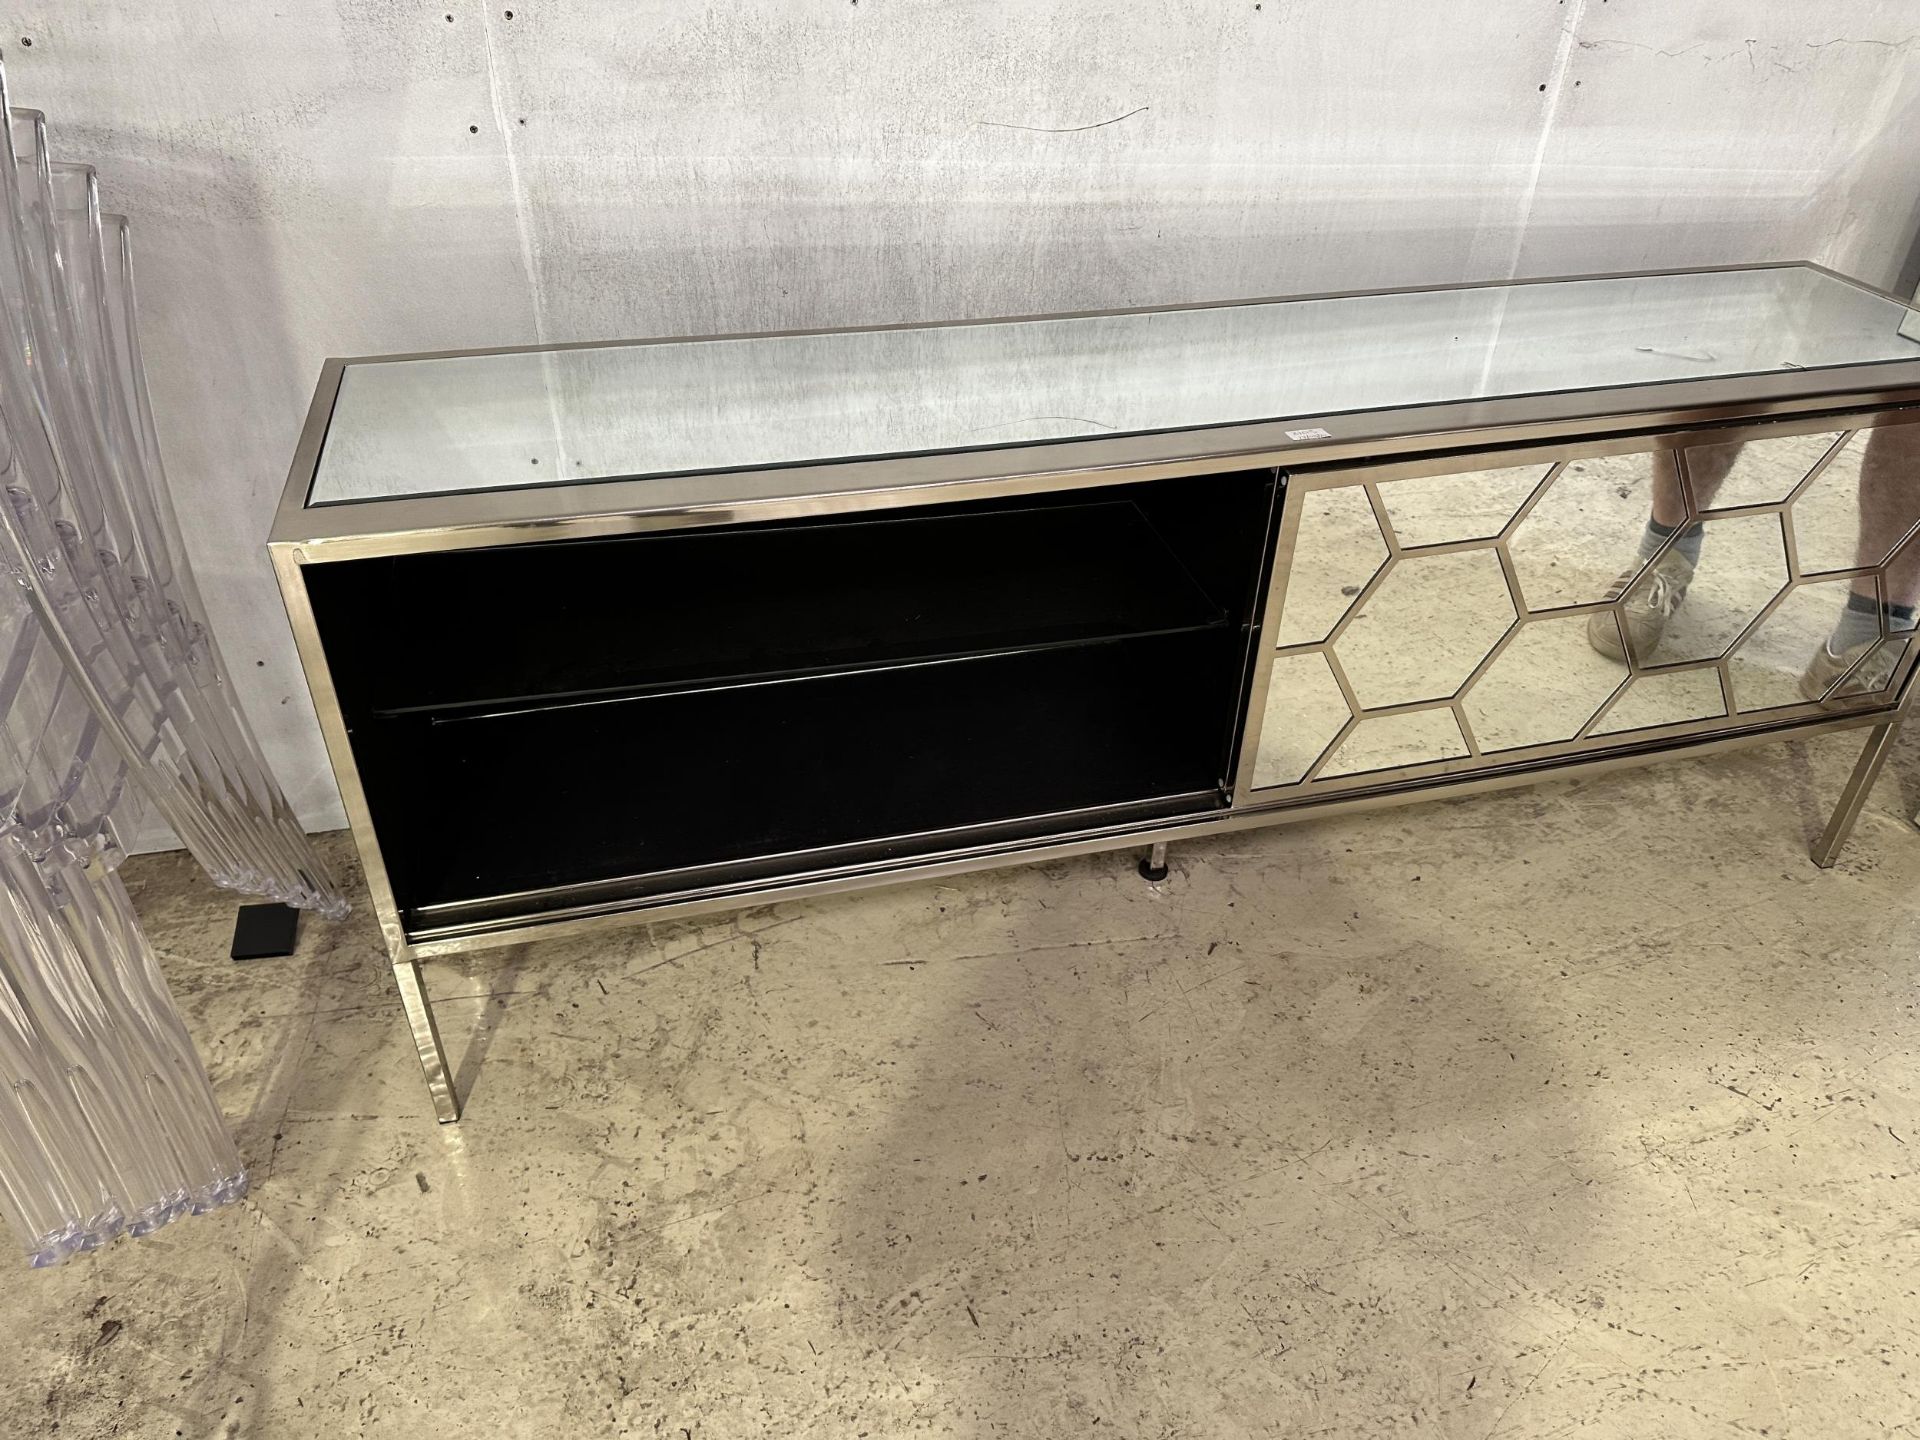 A MIRRORED SIDEBOARD WITH TWO SLIDING DOORS (FROM A DEVELOPER'S SHOW HOME - BELIEVED UNUSED) - Bild 5 aus 5